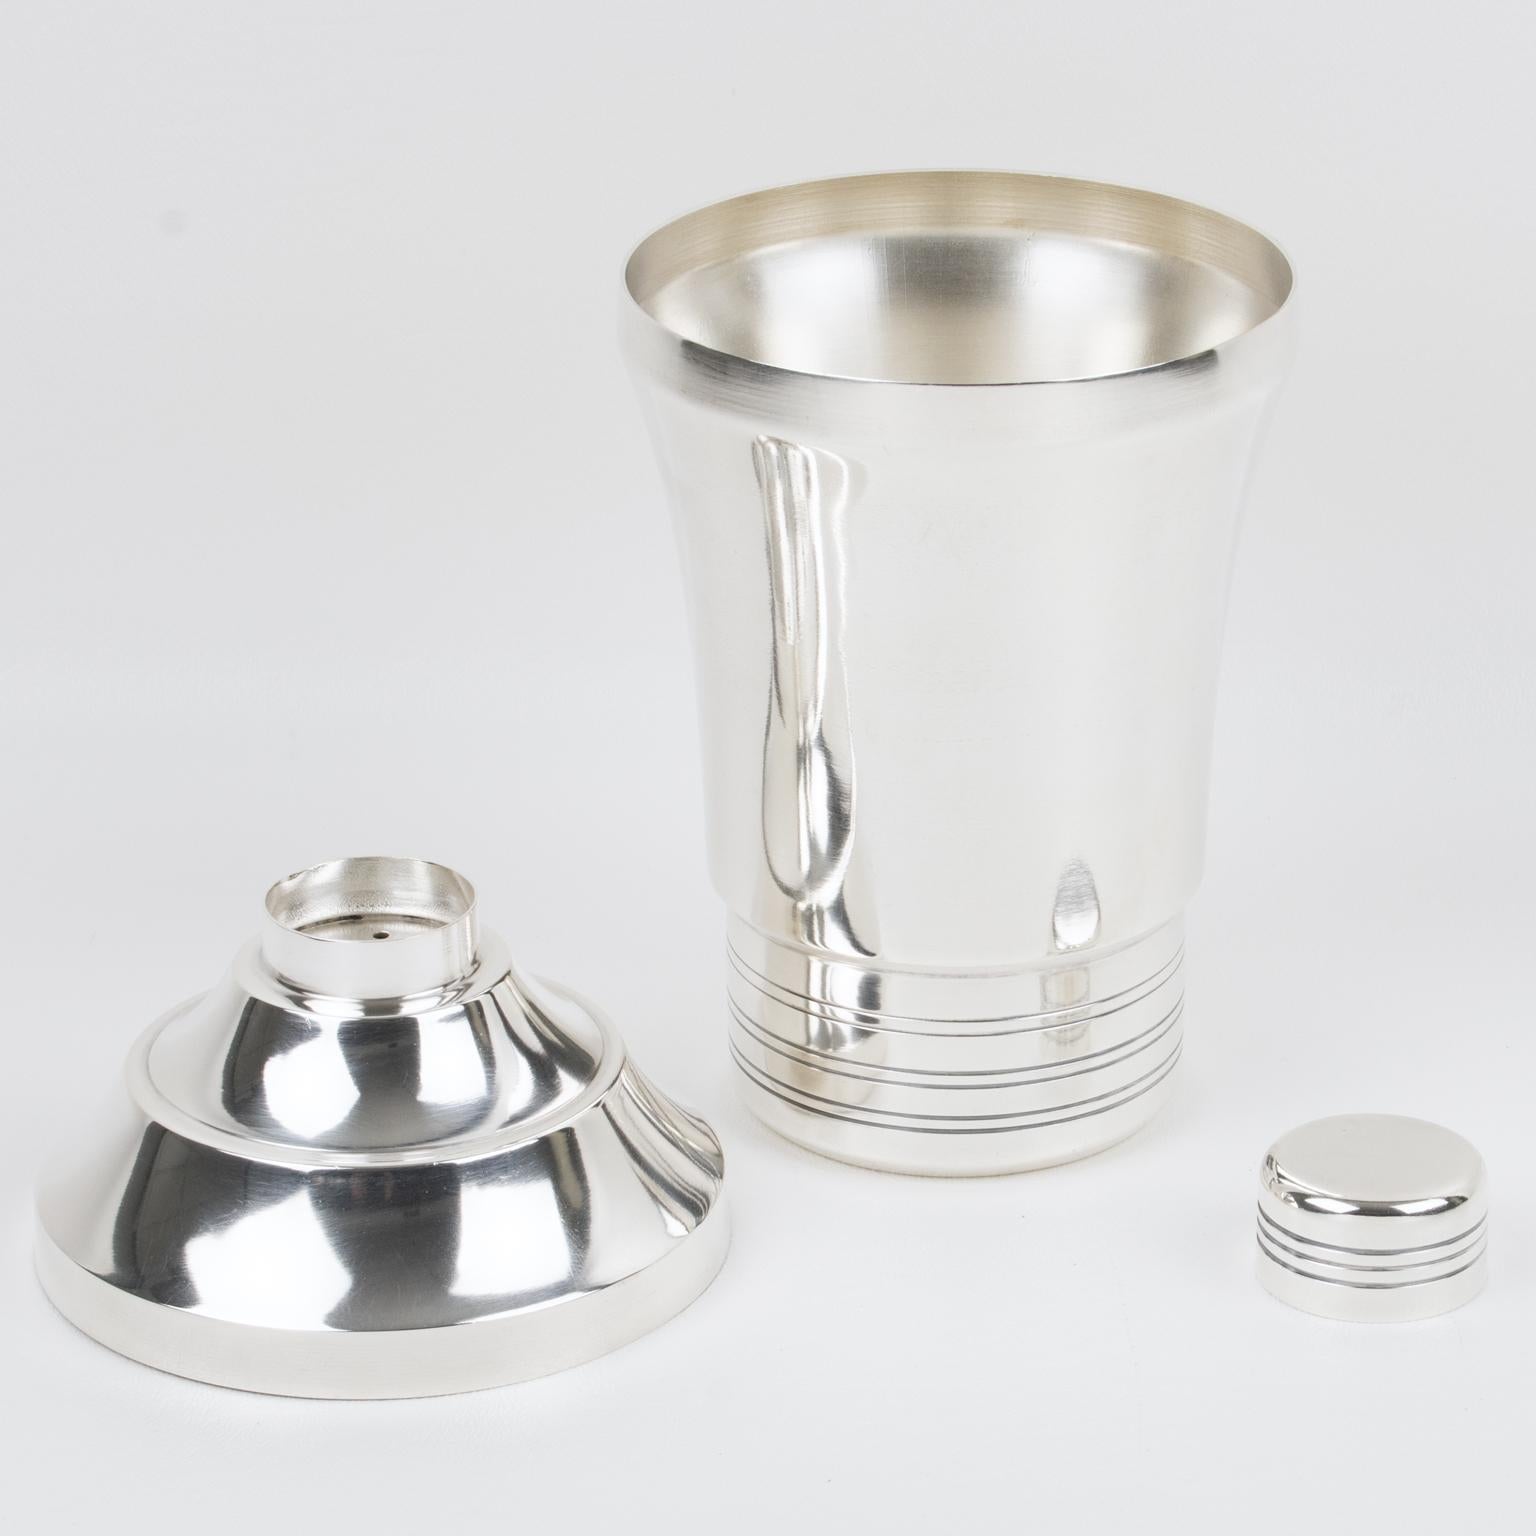 Elegant French Art Deco silver plate cylindrical cocktail or Martini shaker by silversmith G. Renard, Paris. Three-sectioned designed cocktail shaker with removable cap and strainer. Lovely geometric shape with typical Deco design. Marked underside